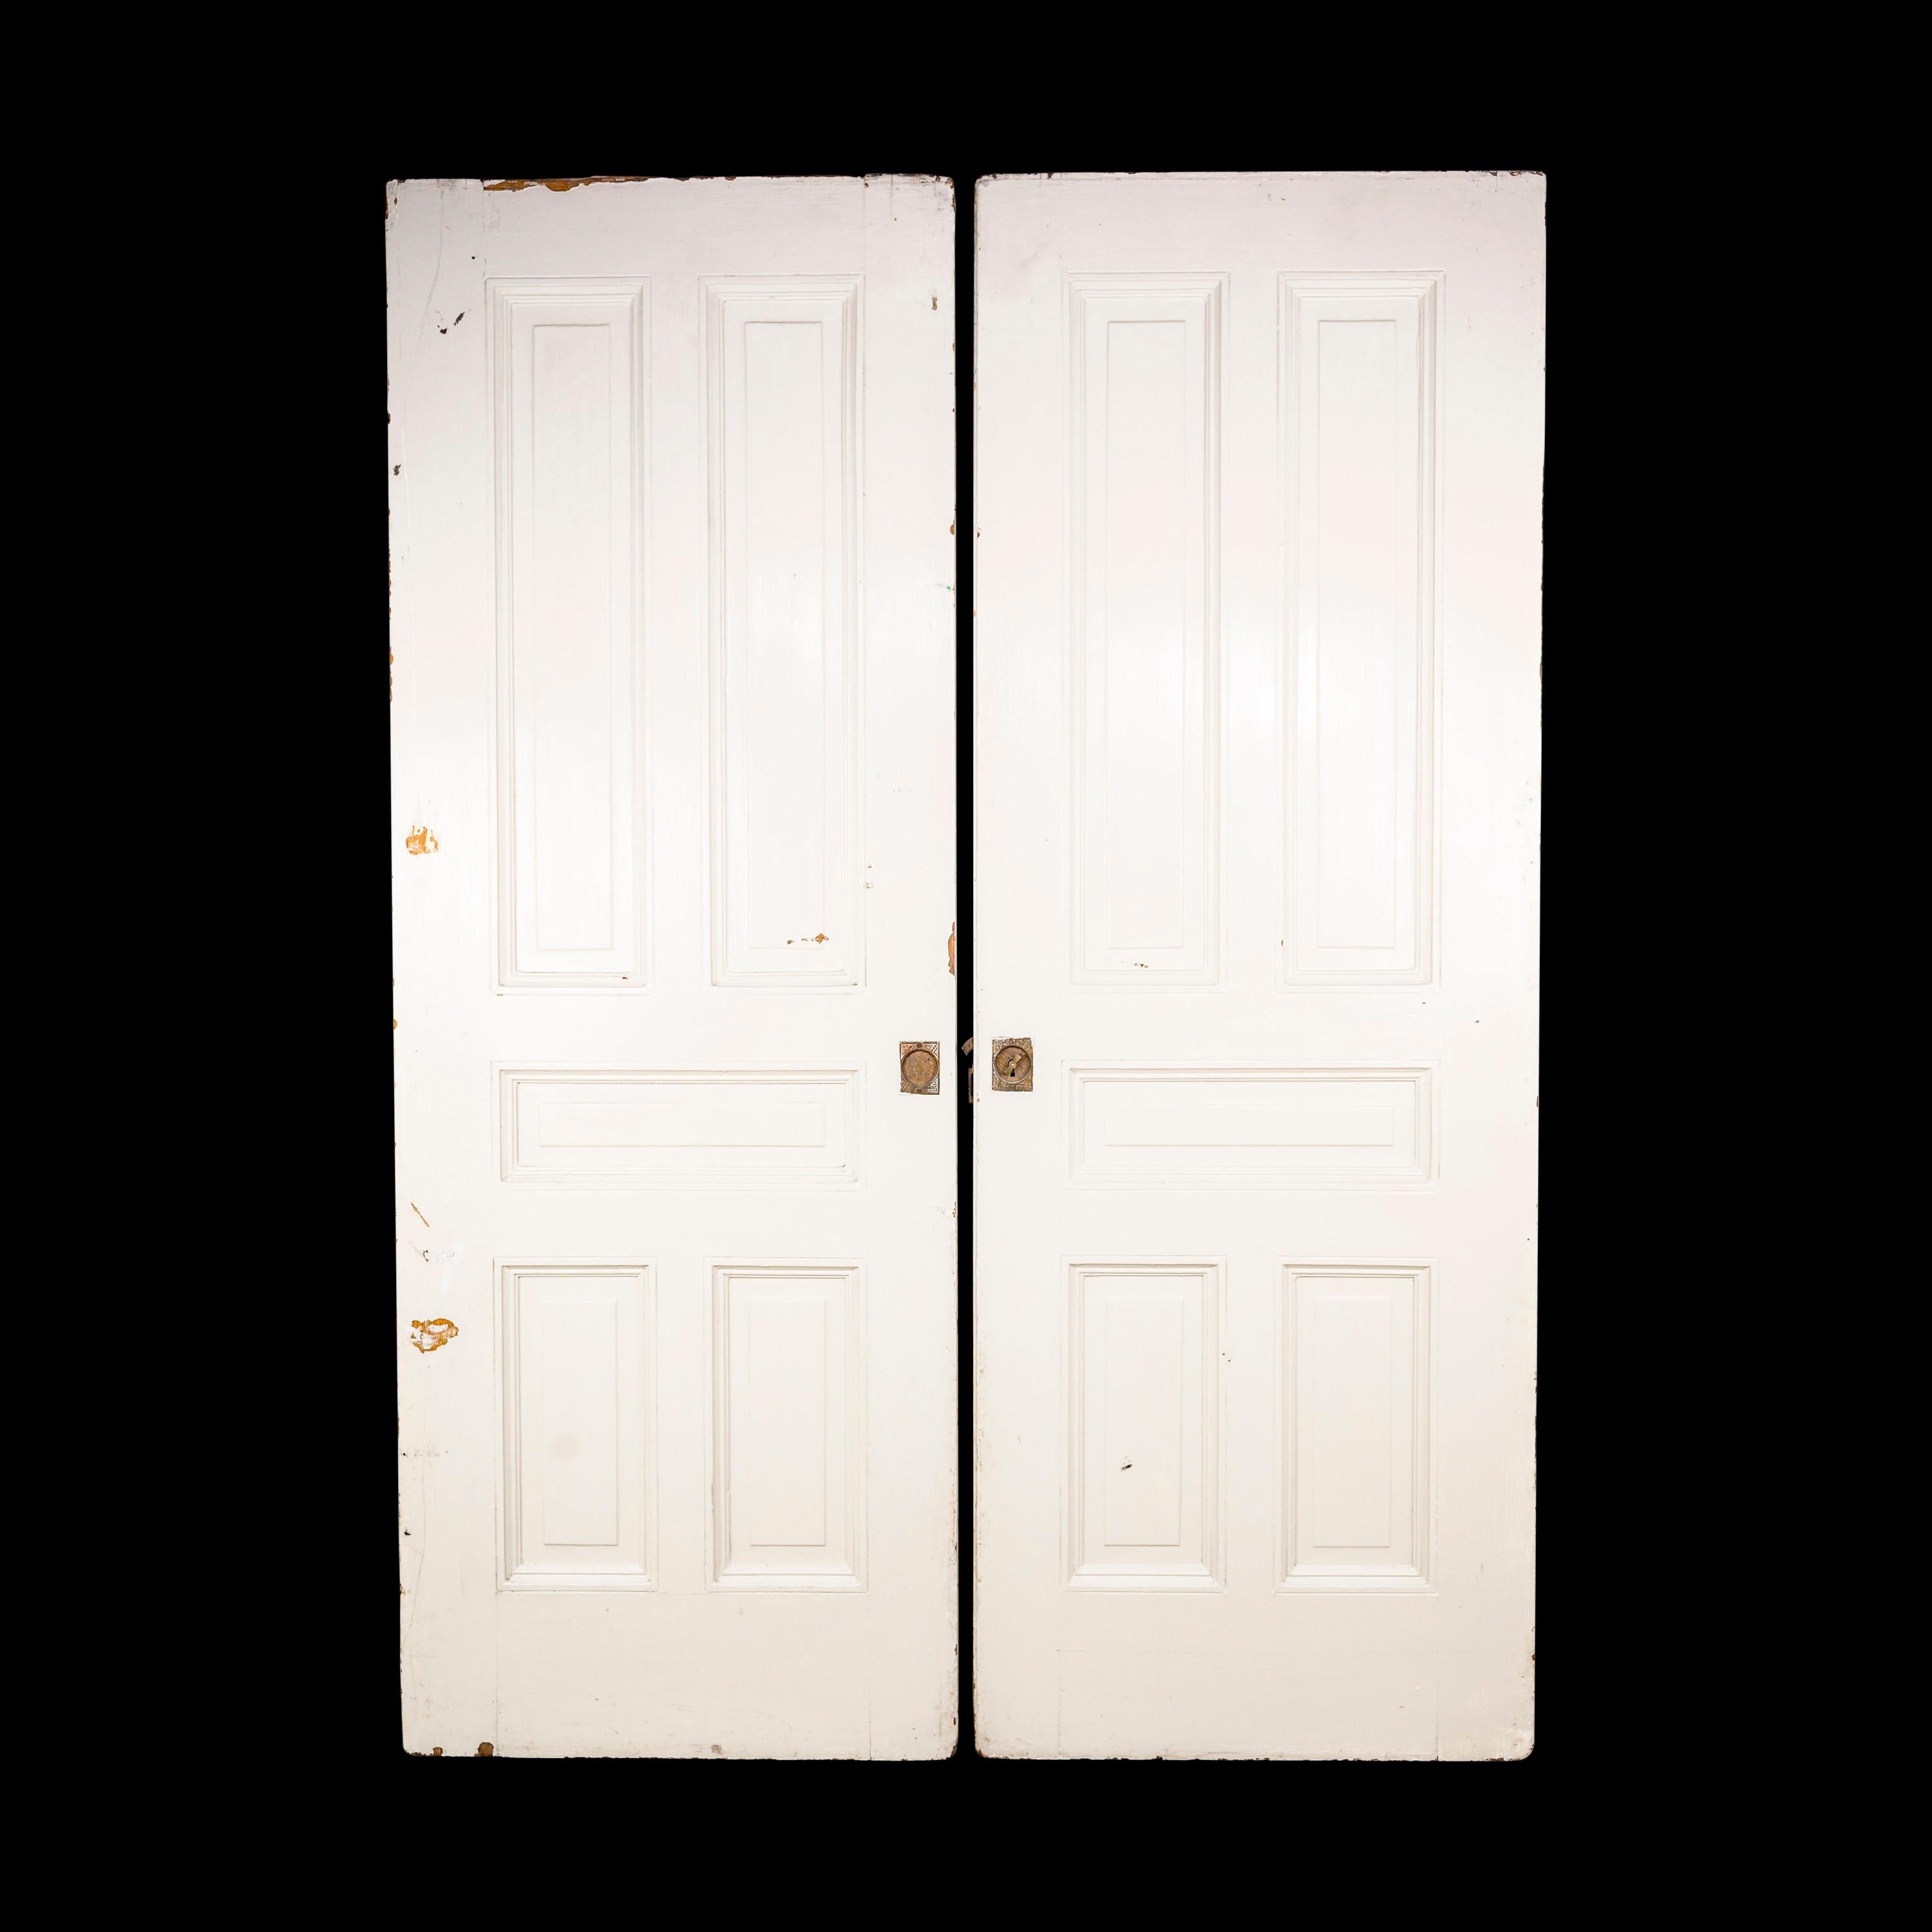 Early 20th Century pair of wood sliding pocket doors with five panels each. Cchipped corners and scratches in the white paint. Comes with some of the original hardware. Please see photos. The bottom wheels still slide. Priced as a pair. Please note,